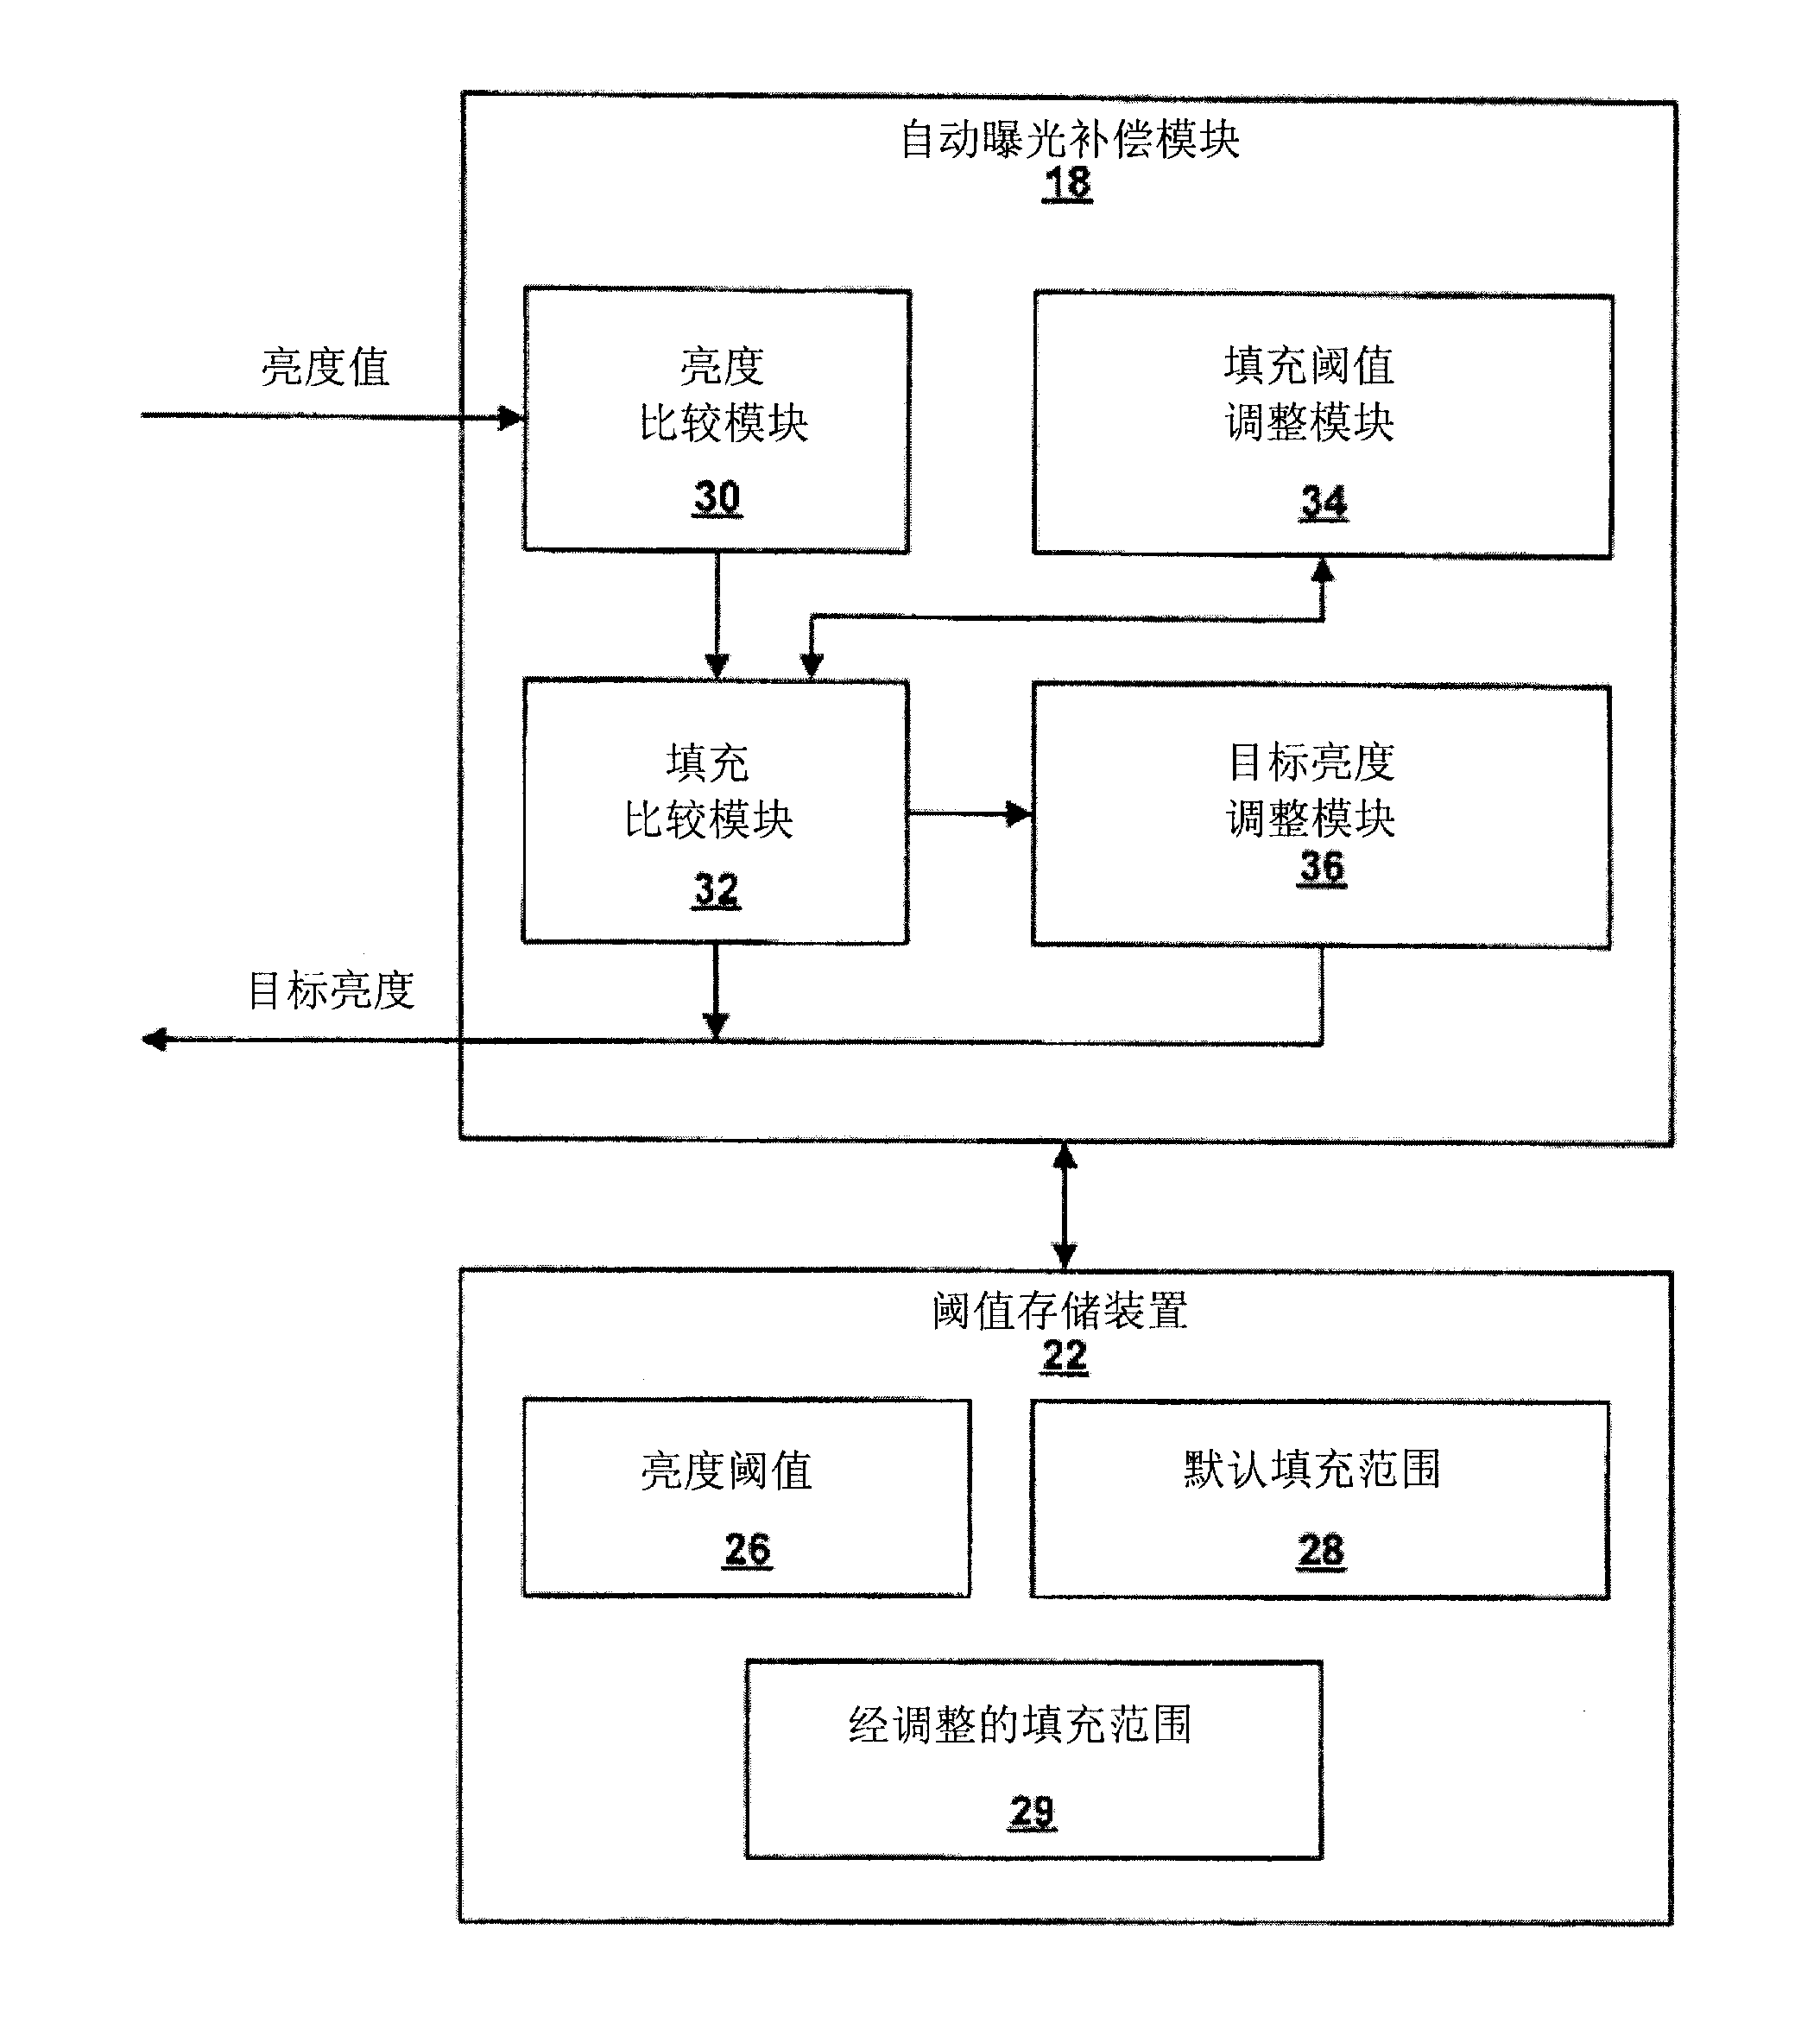 Dynamic automatic exposure compensation for image capture devices